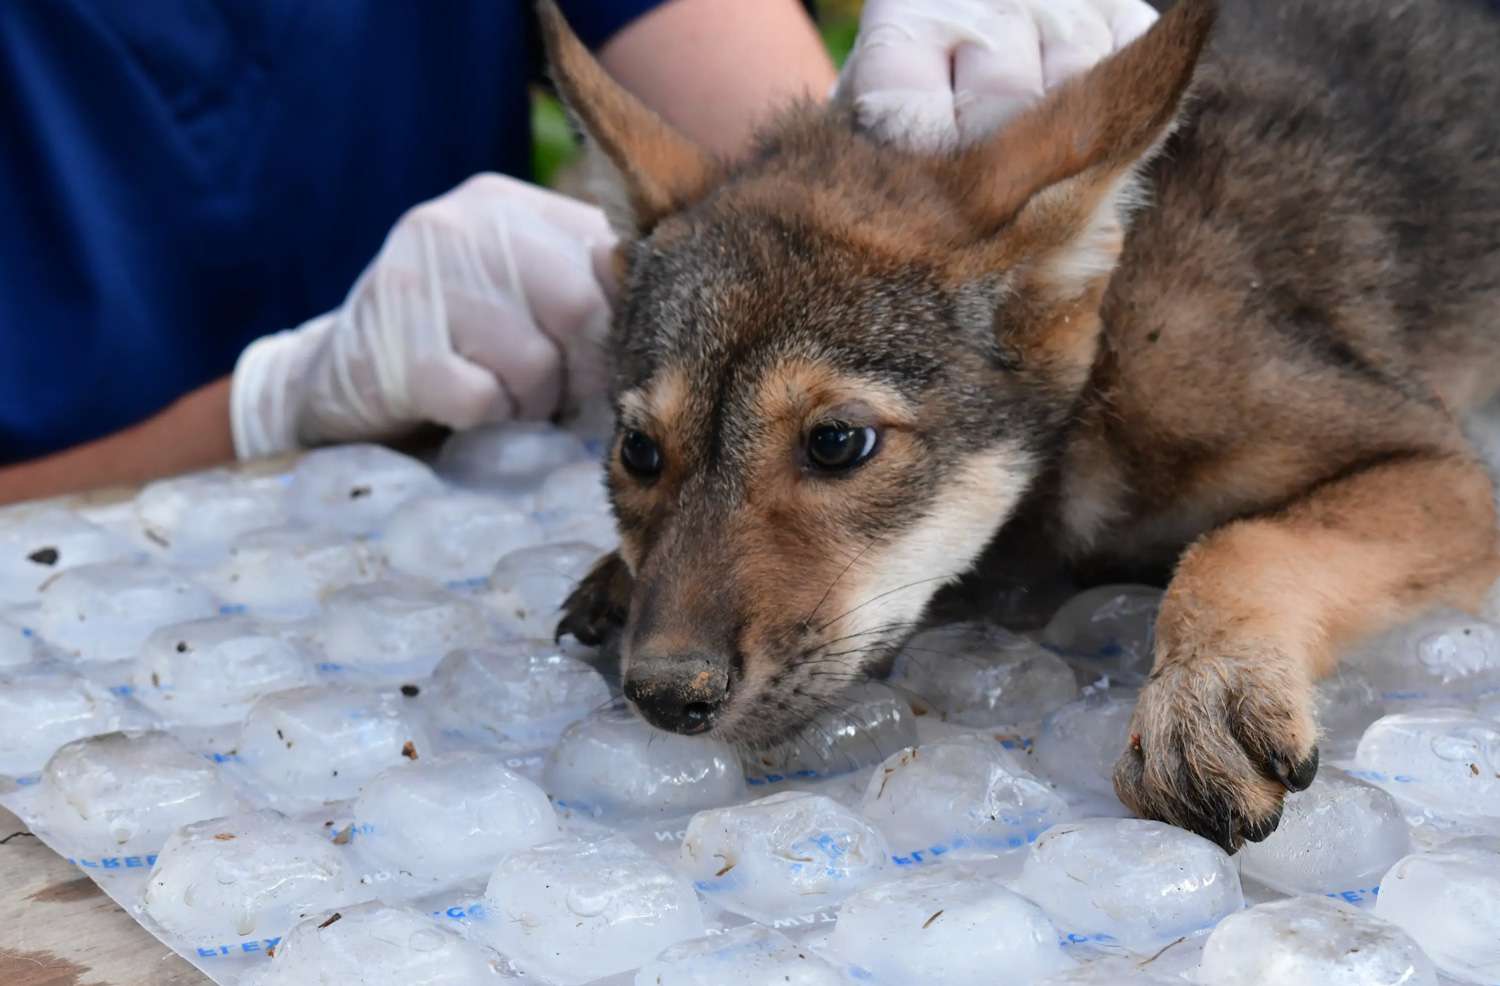 4 of the World’s Most Endangered Wolf Pups Born at the St. Louis Zoo: 'Each Birth Is an Achievement'